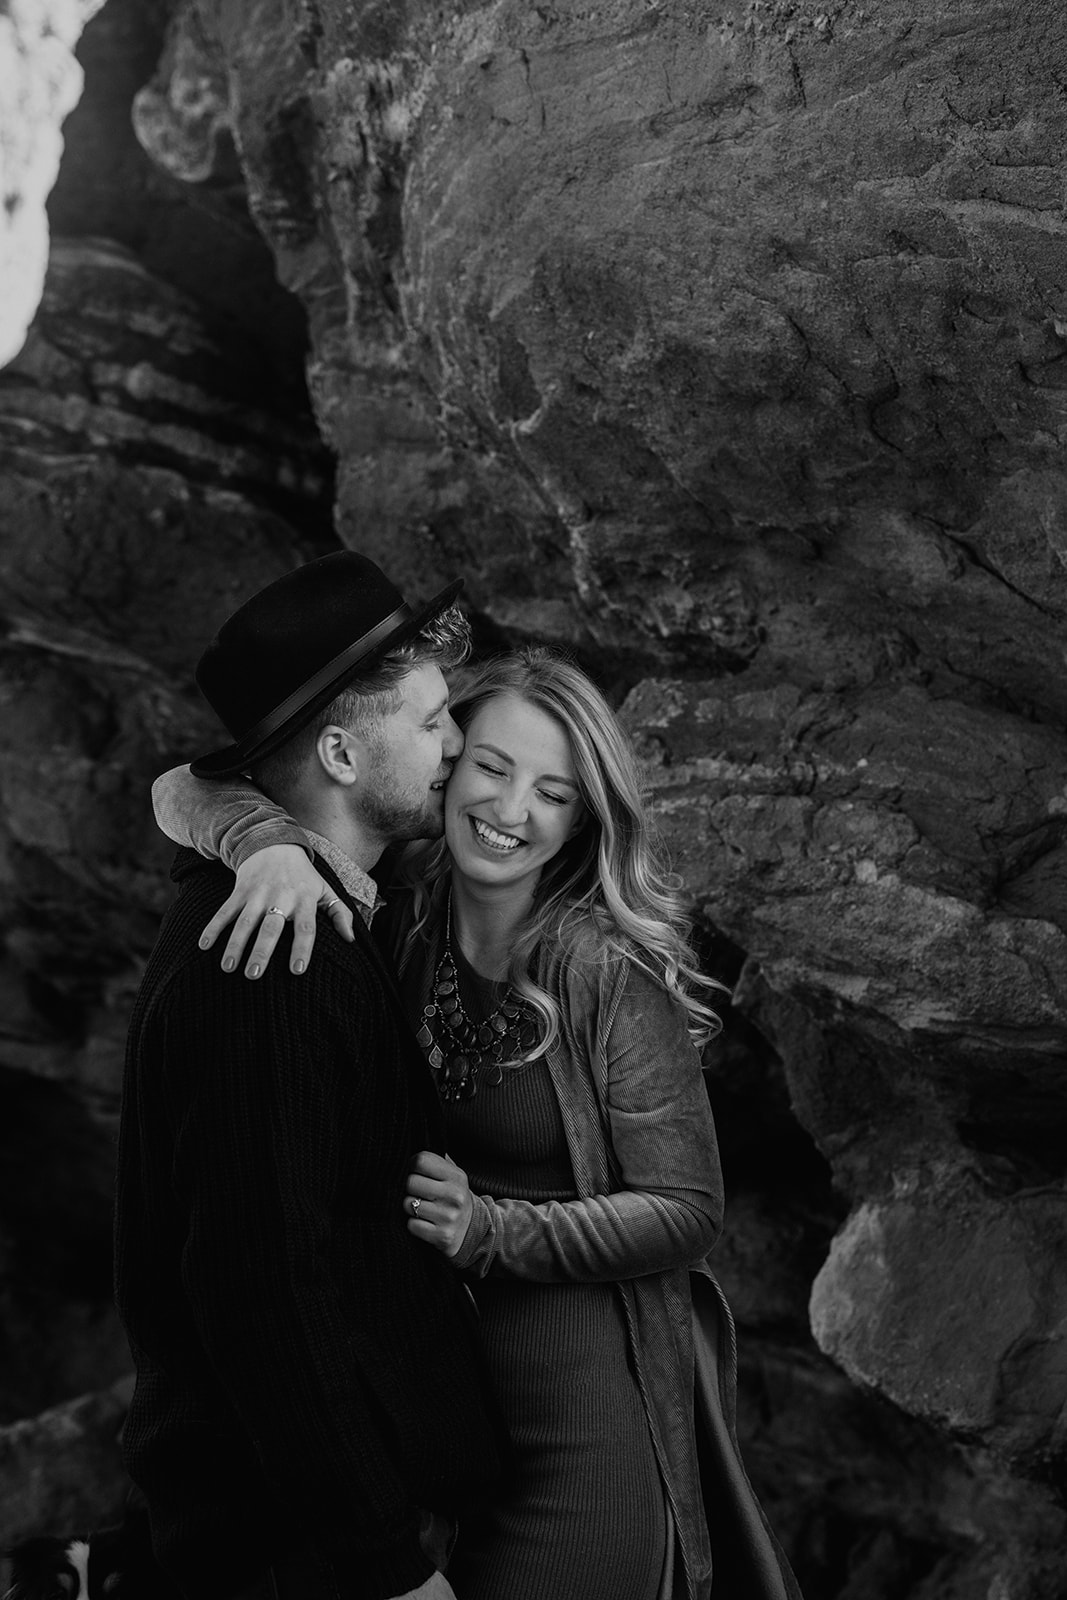 stylish fiancée kissing his partners cheek in black and white photo